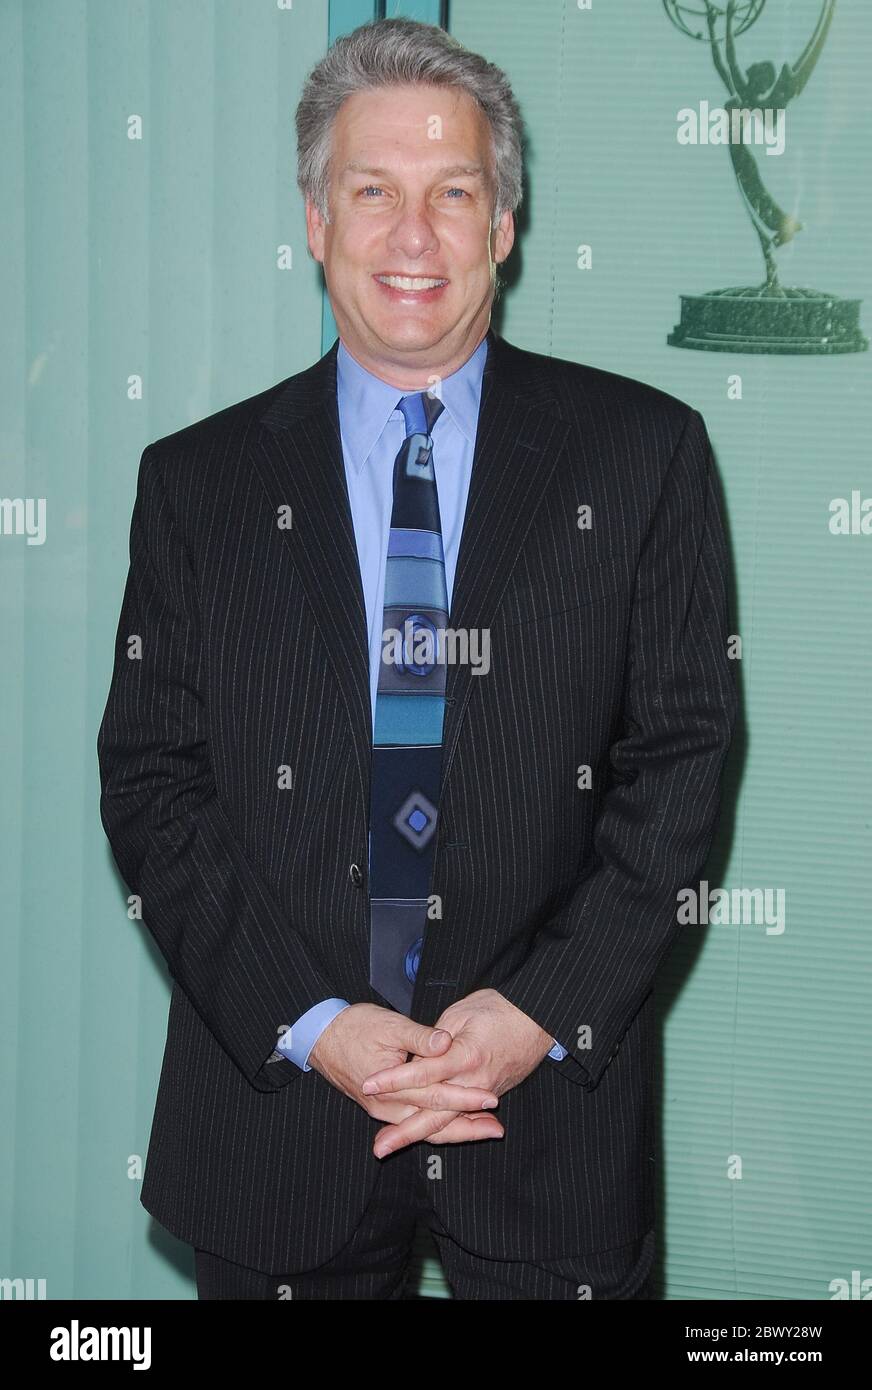 Marc Summers at the Academy of Television Arts & Sciences Presents 'A Special Evening with Bob Barker' held at The Leonard Goldenson Theater in North Hollywood, CA. The event took place on Monday, May 7, 2007. Photo by: SBM / PictureLux- File Reference # 34006-4354SBMPLX Stock Photo